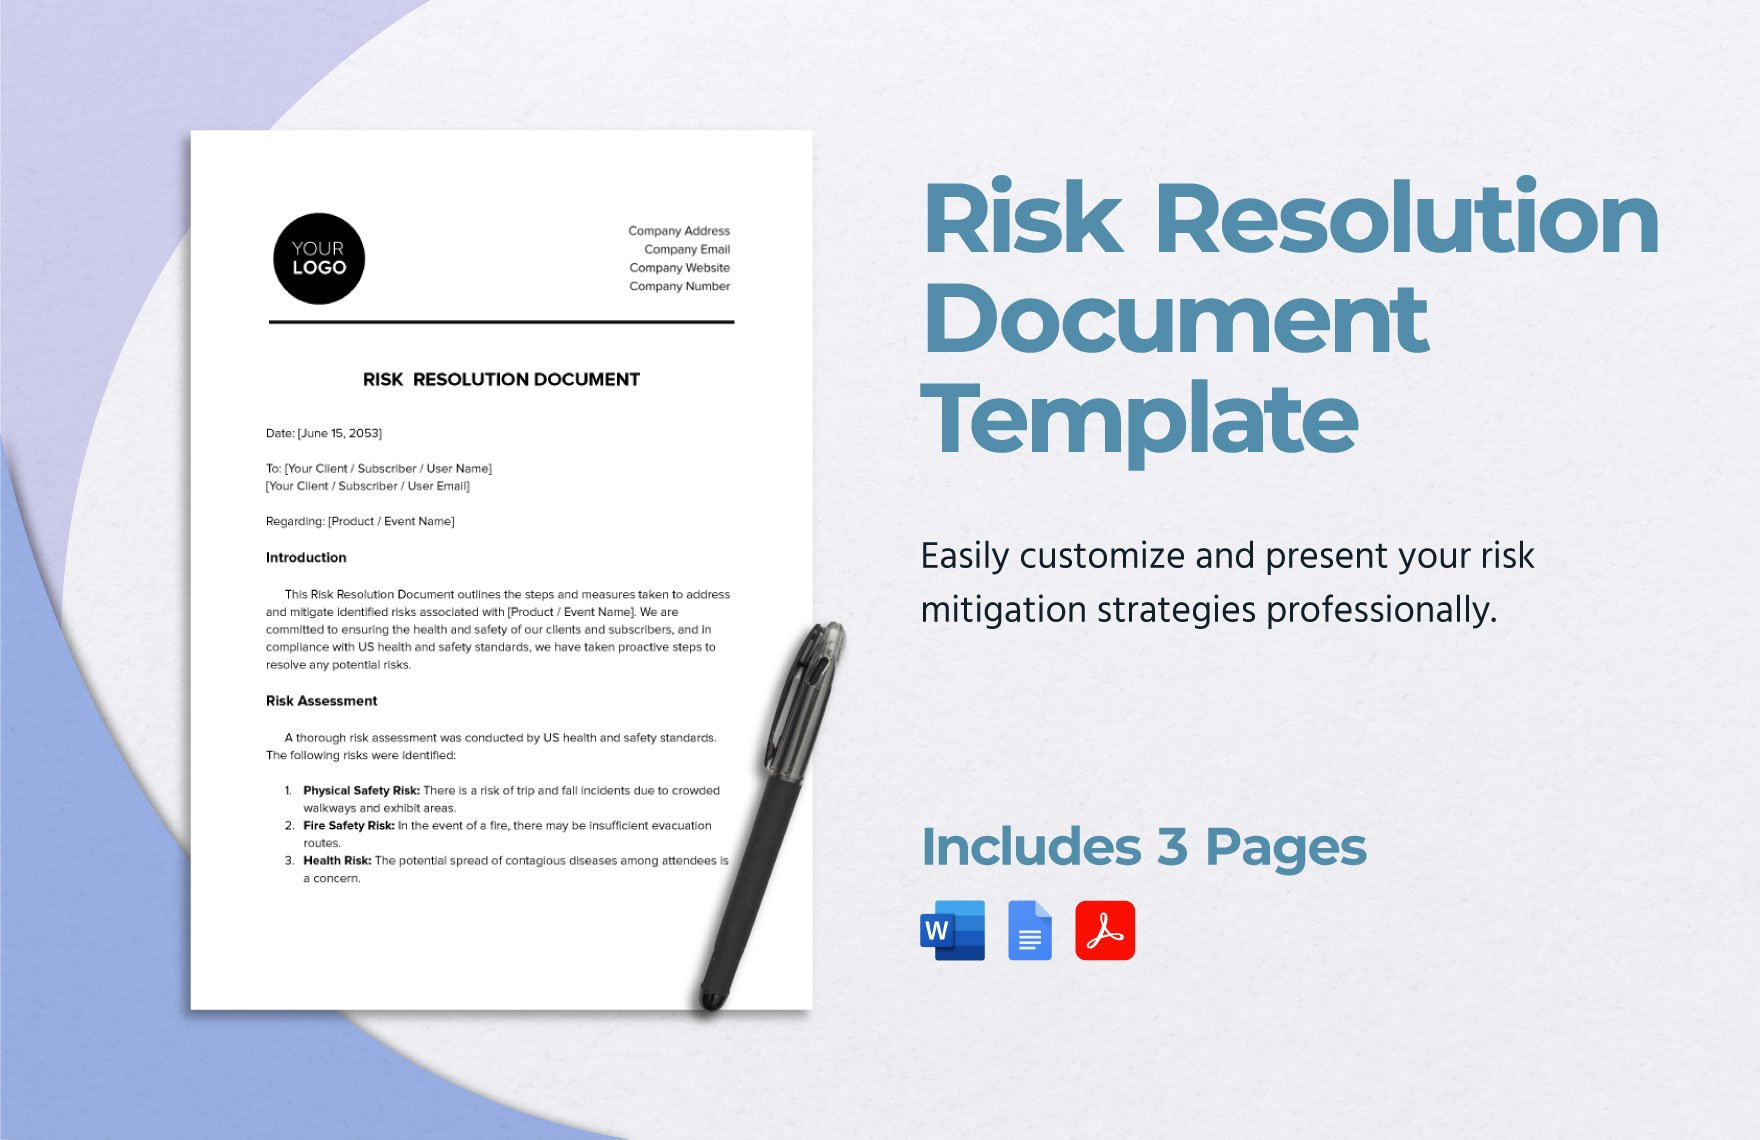 Risk Resolution Document Template